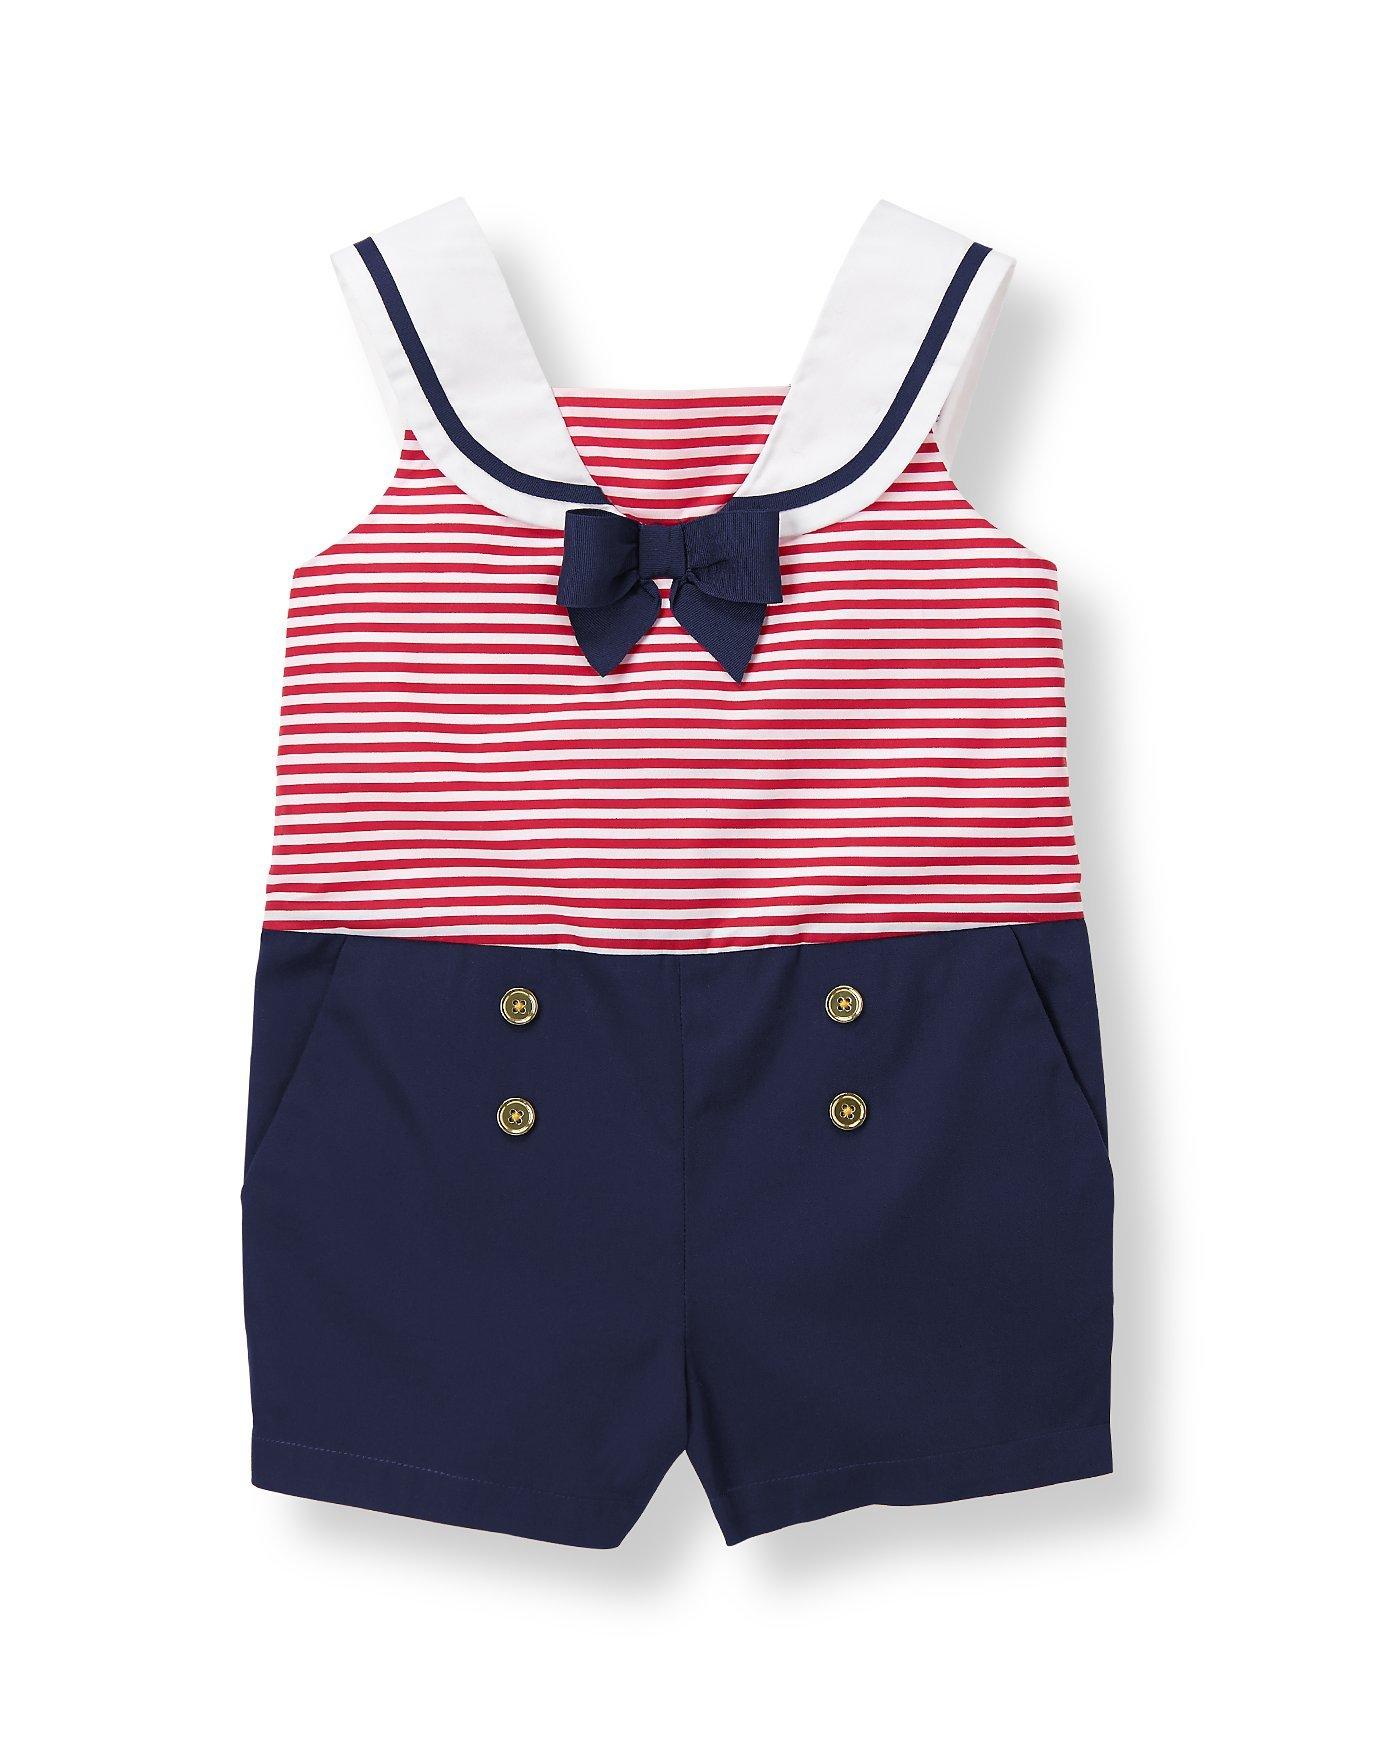 Girl Americana Red Stripe Sweet Sailor Romper by Janie and Jack